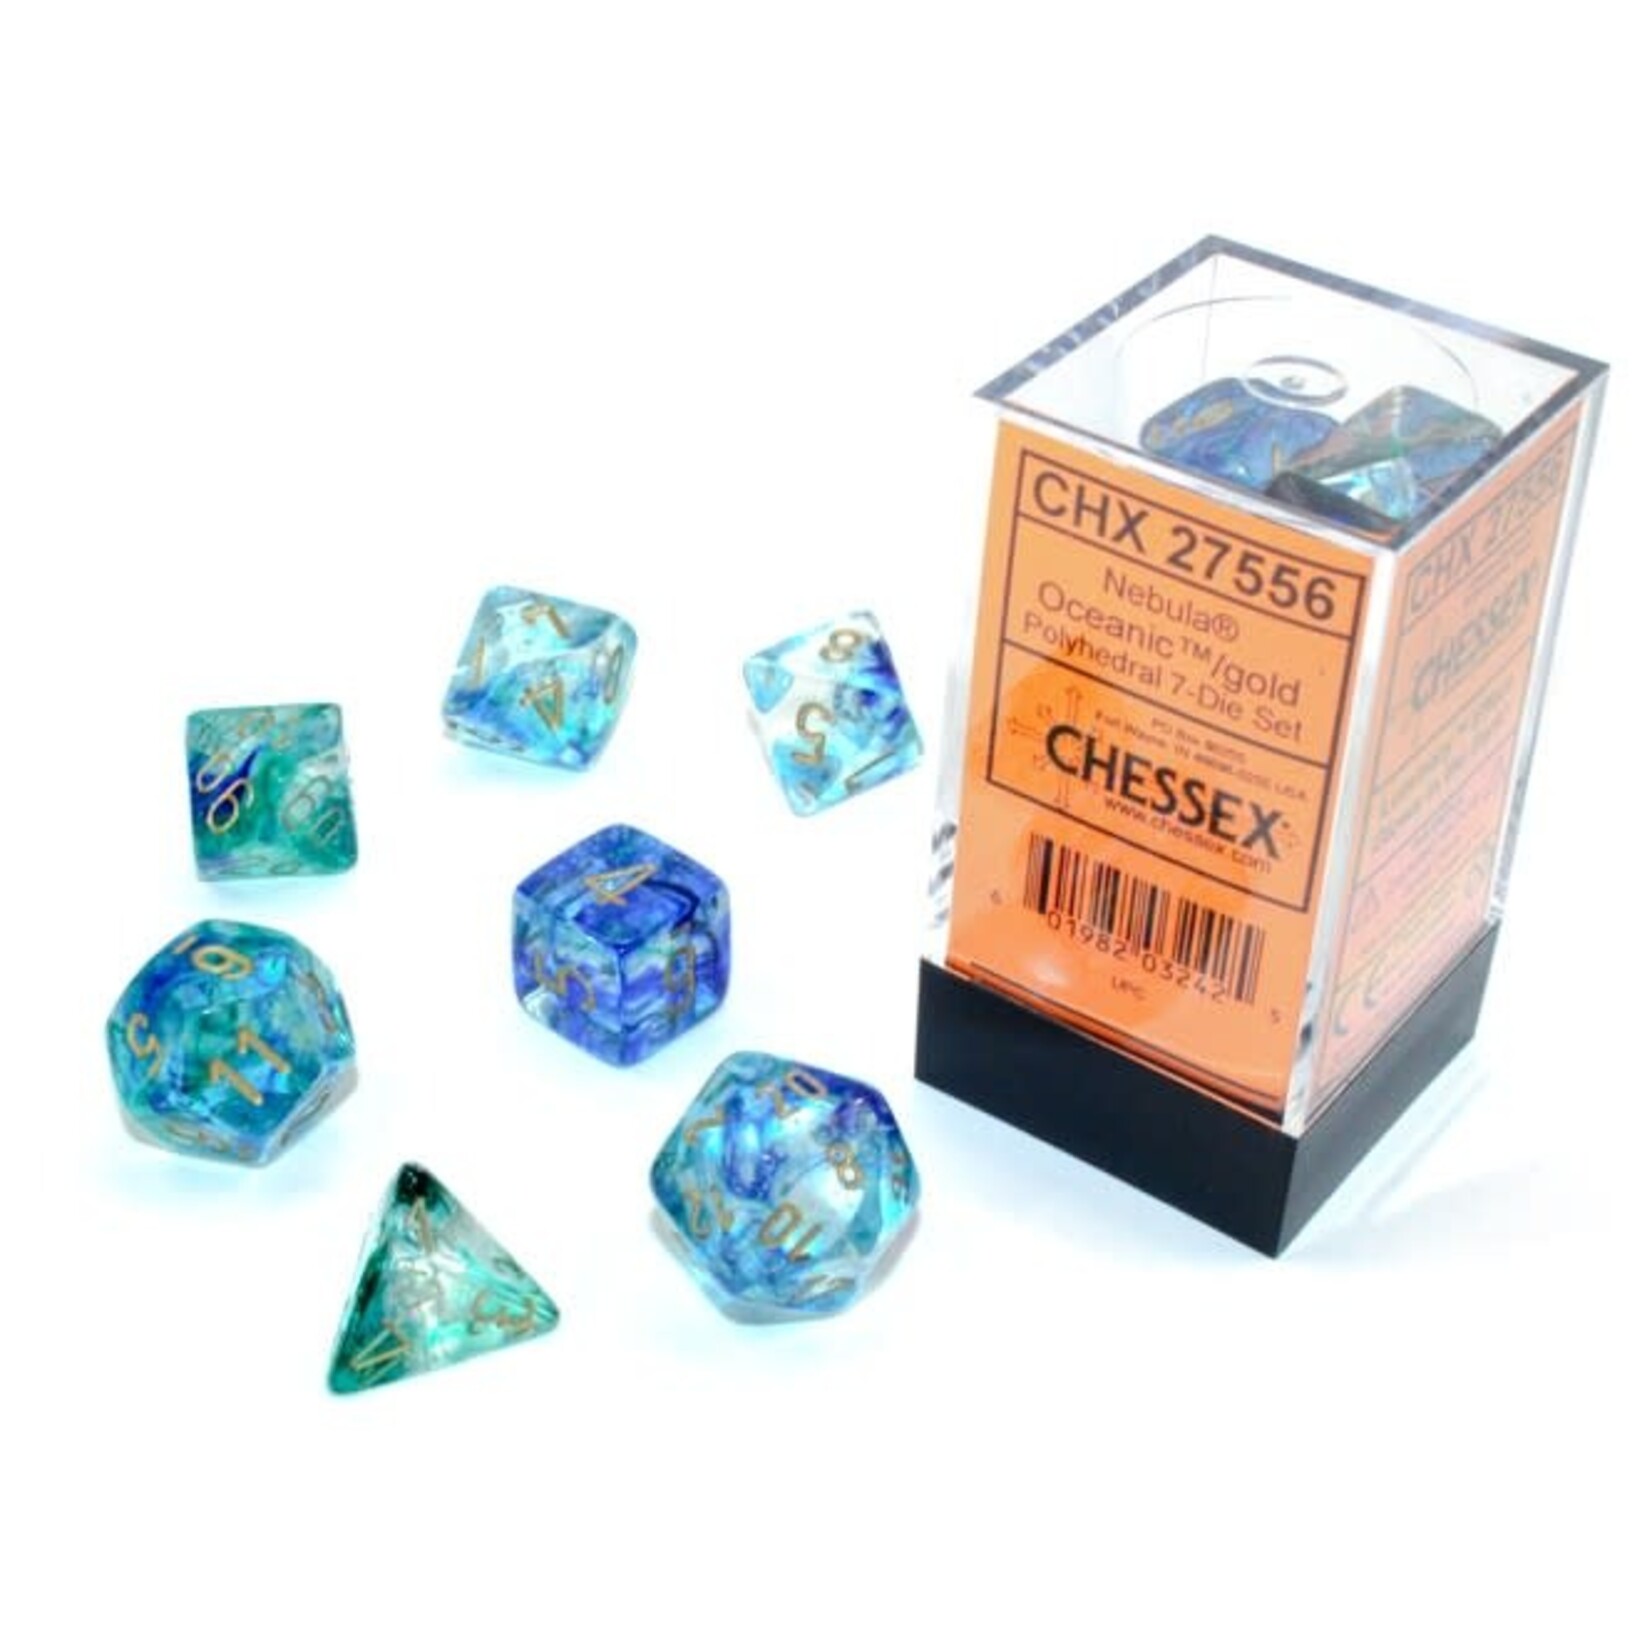 Chessex Polyhedral 7-Die Set: Nebula Oceanic with gold